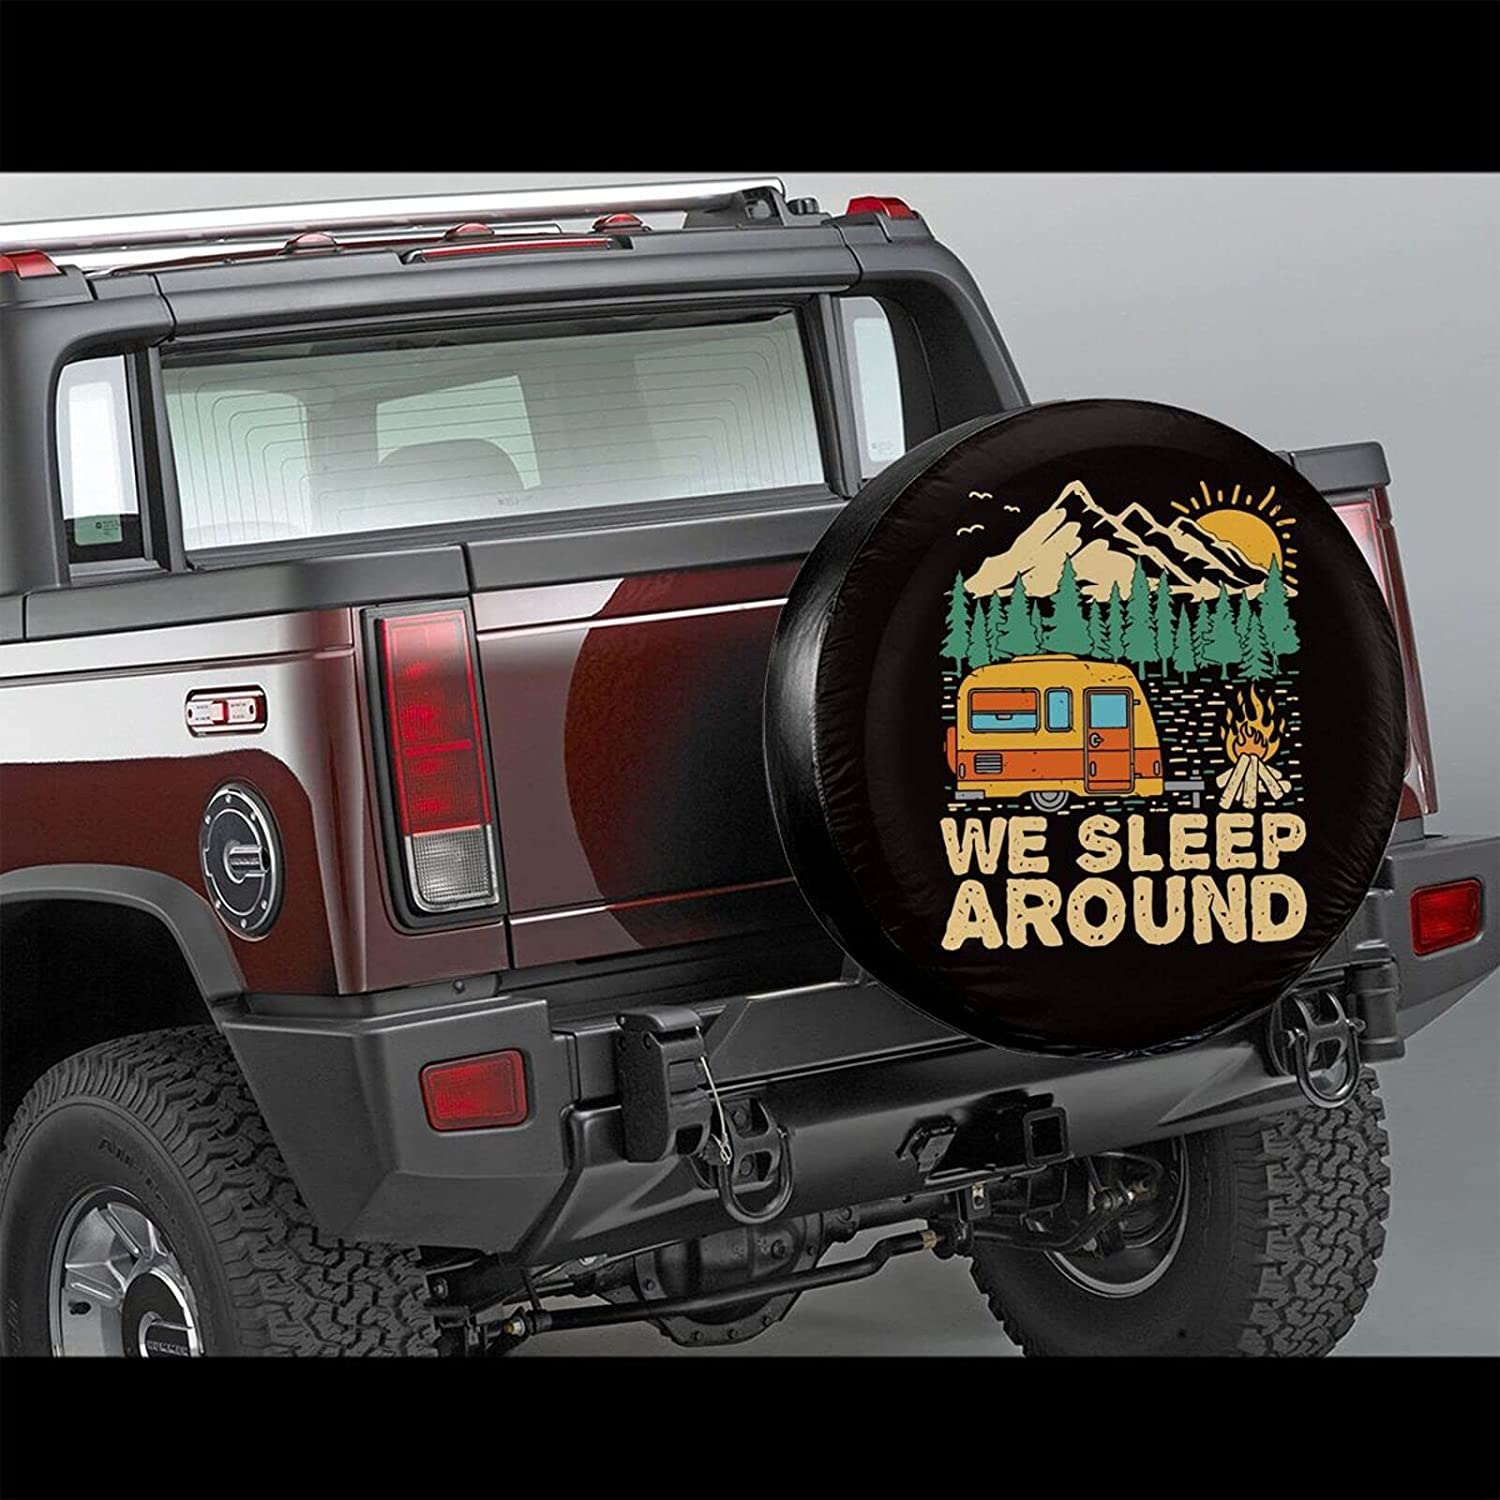 Spare Tire Cover We Sleep Around Universal Wheel Protectors Weatherproof  Fit for Jeep SUV Camper Travel Auto Accessories Dust-Proof Tire Covers 